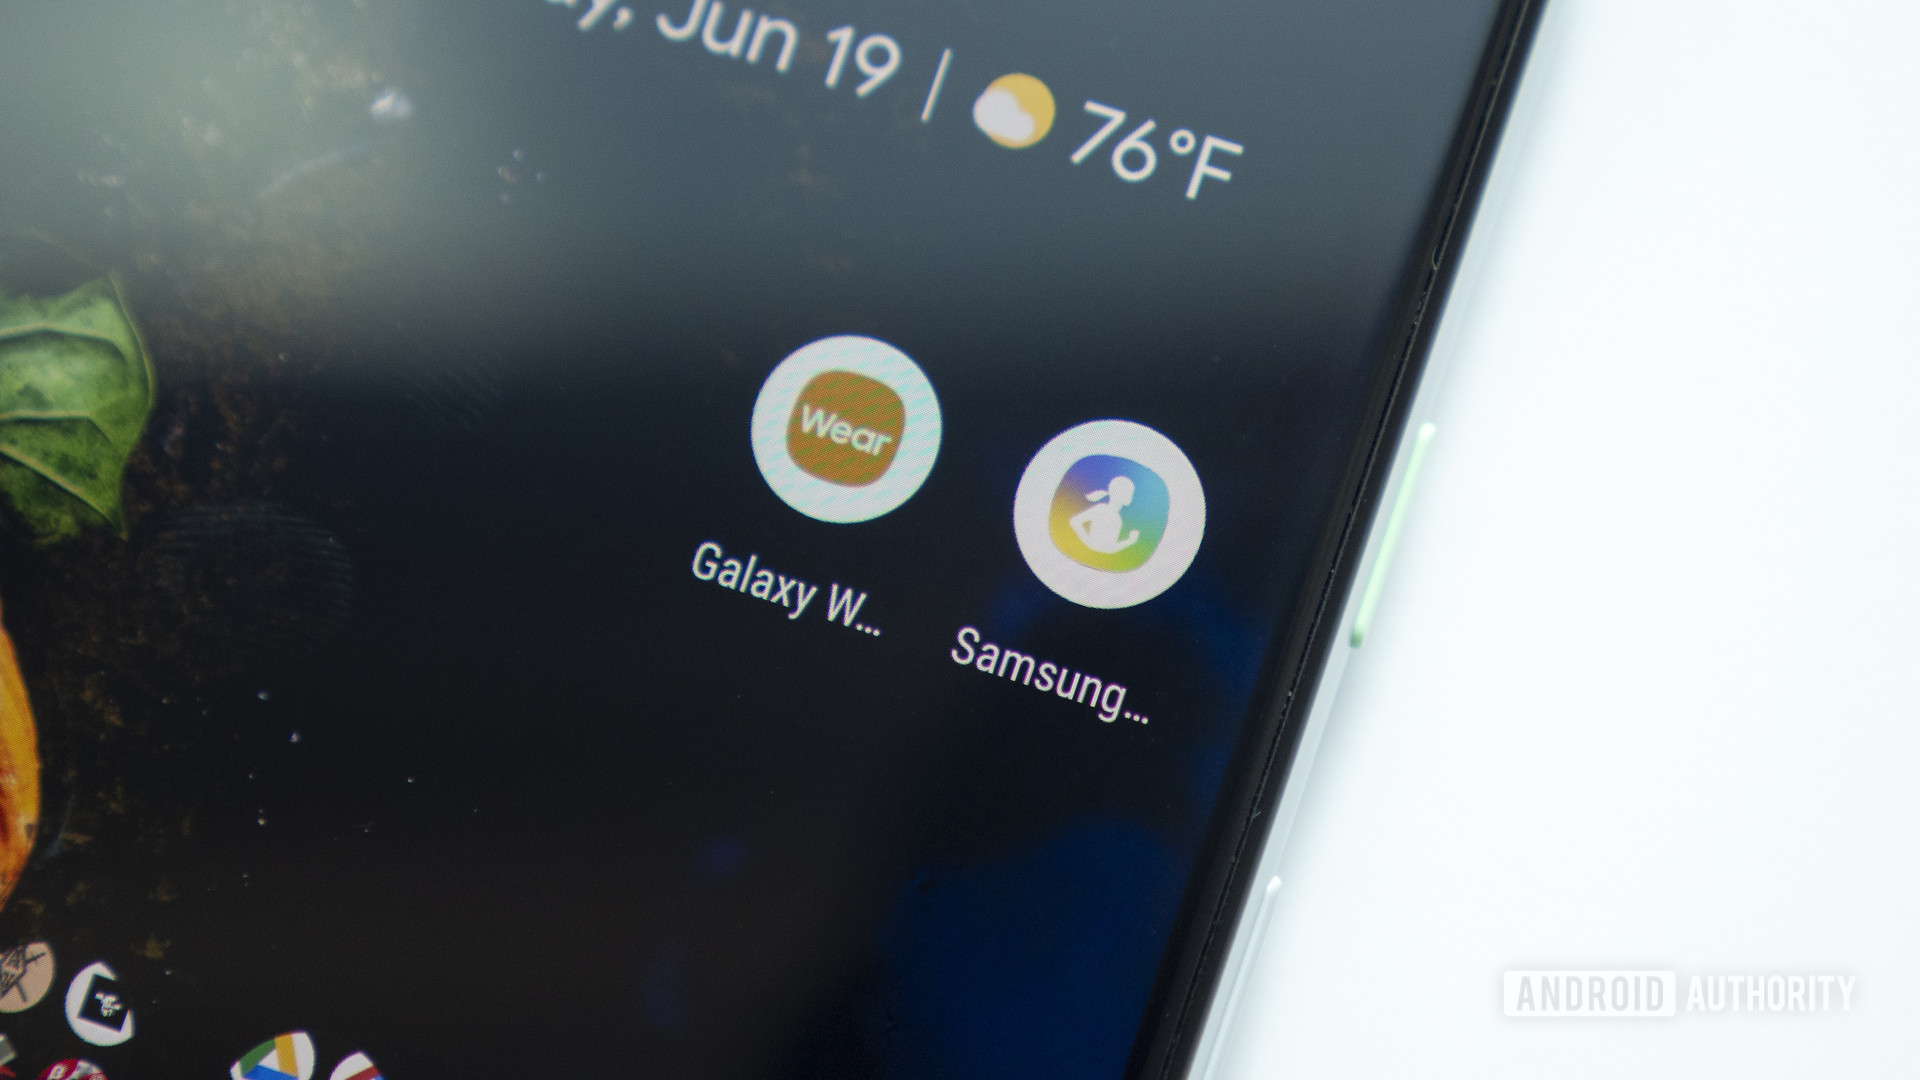 samsung health and galaxy wearable apps on google pixel 3